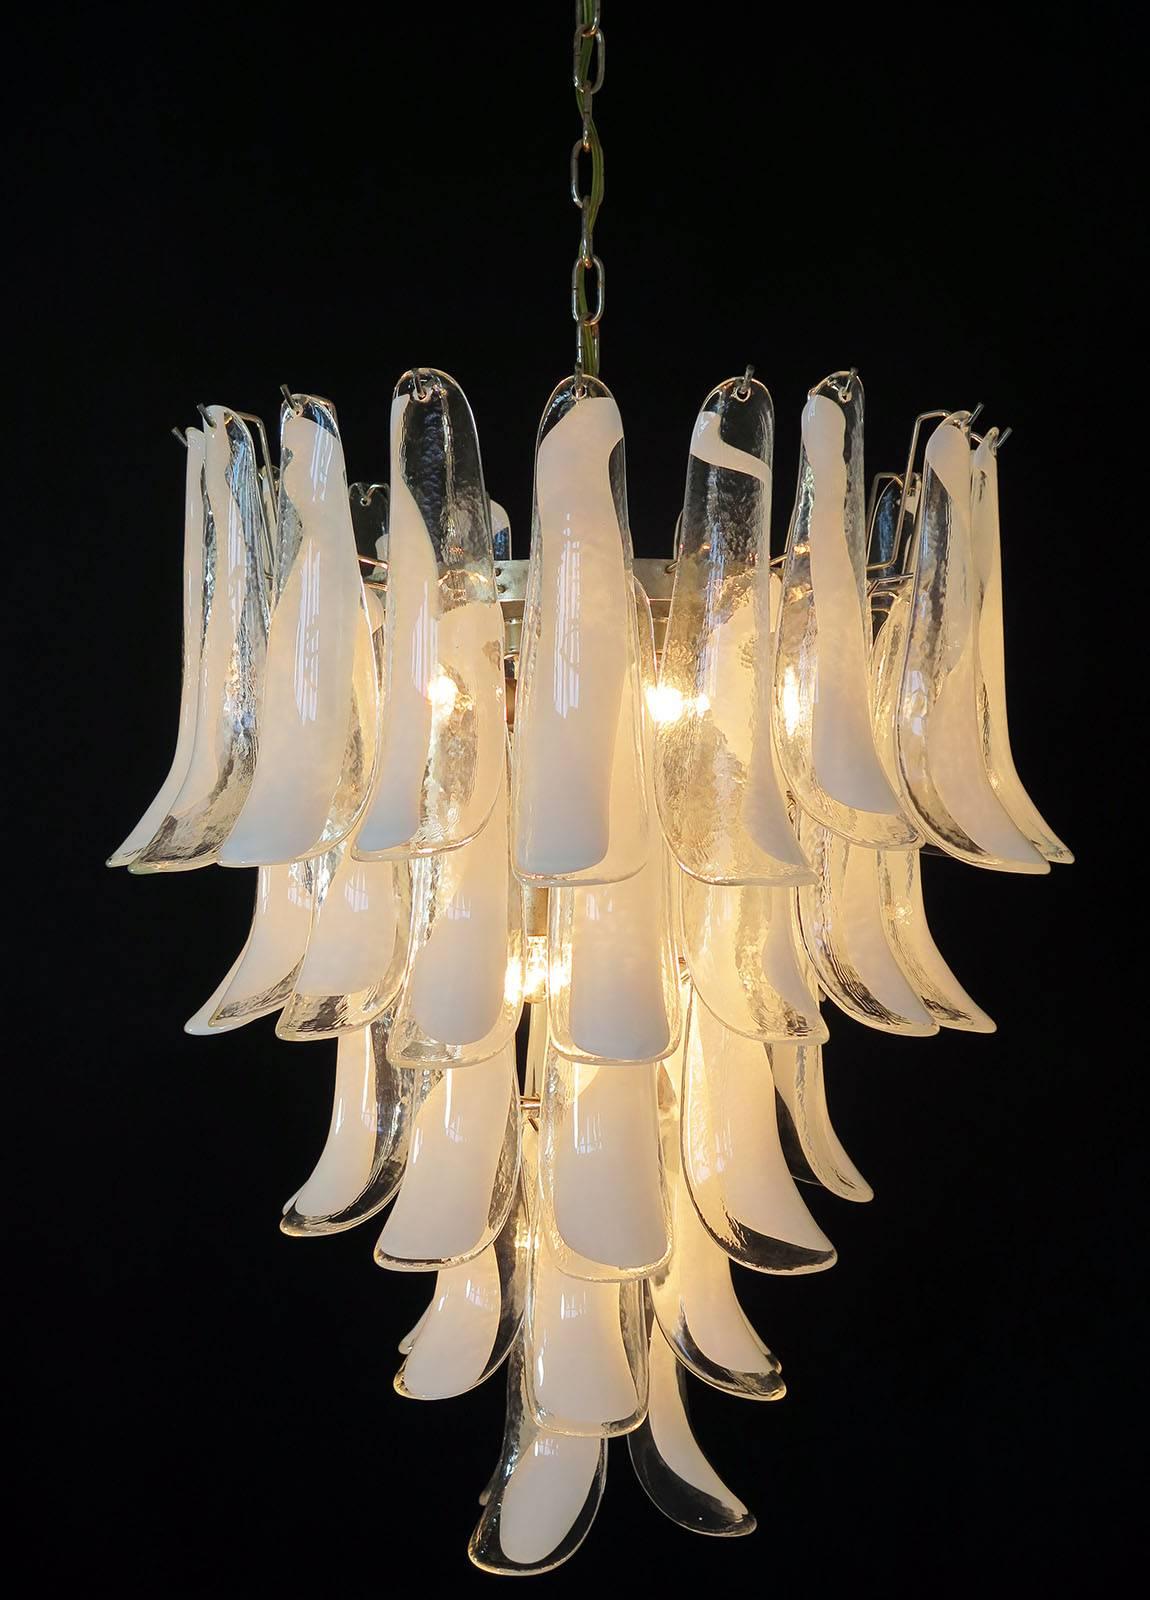 Huge Italian vintage Murano chandelier made by 52 glass petals (transparent and white “lattimo”) in a chrome.
Period: 1960s / 1970s
Dimensions: 55.10 inches (140 cm) height with chain; 29.50 inches (75 cm) height without chain; 26 inches (66